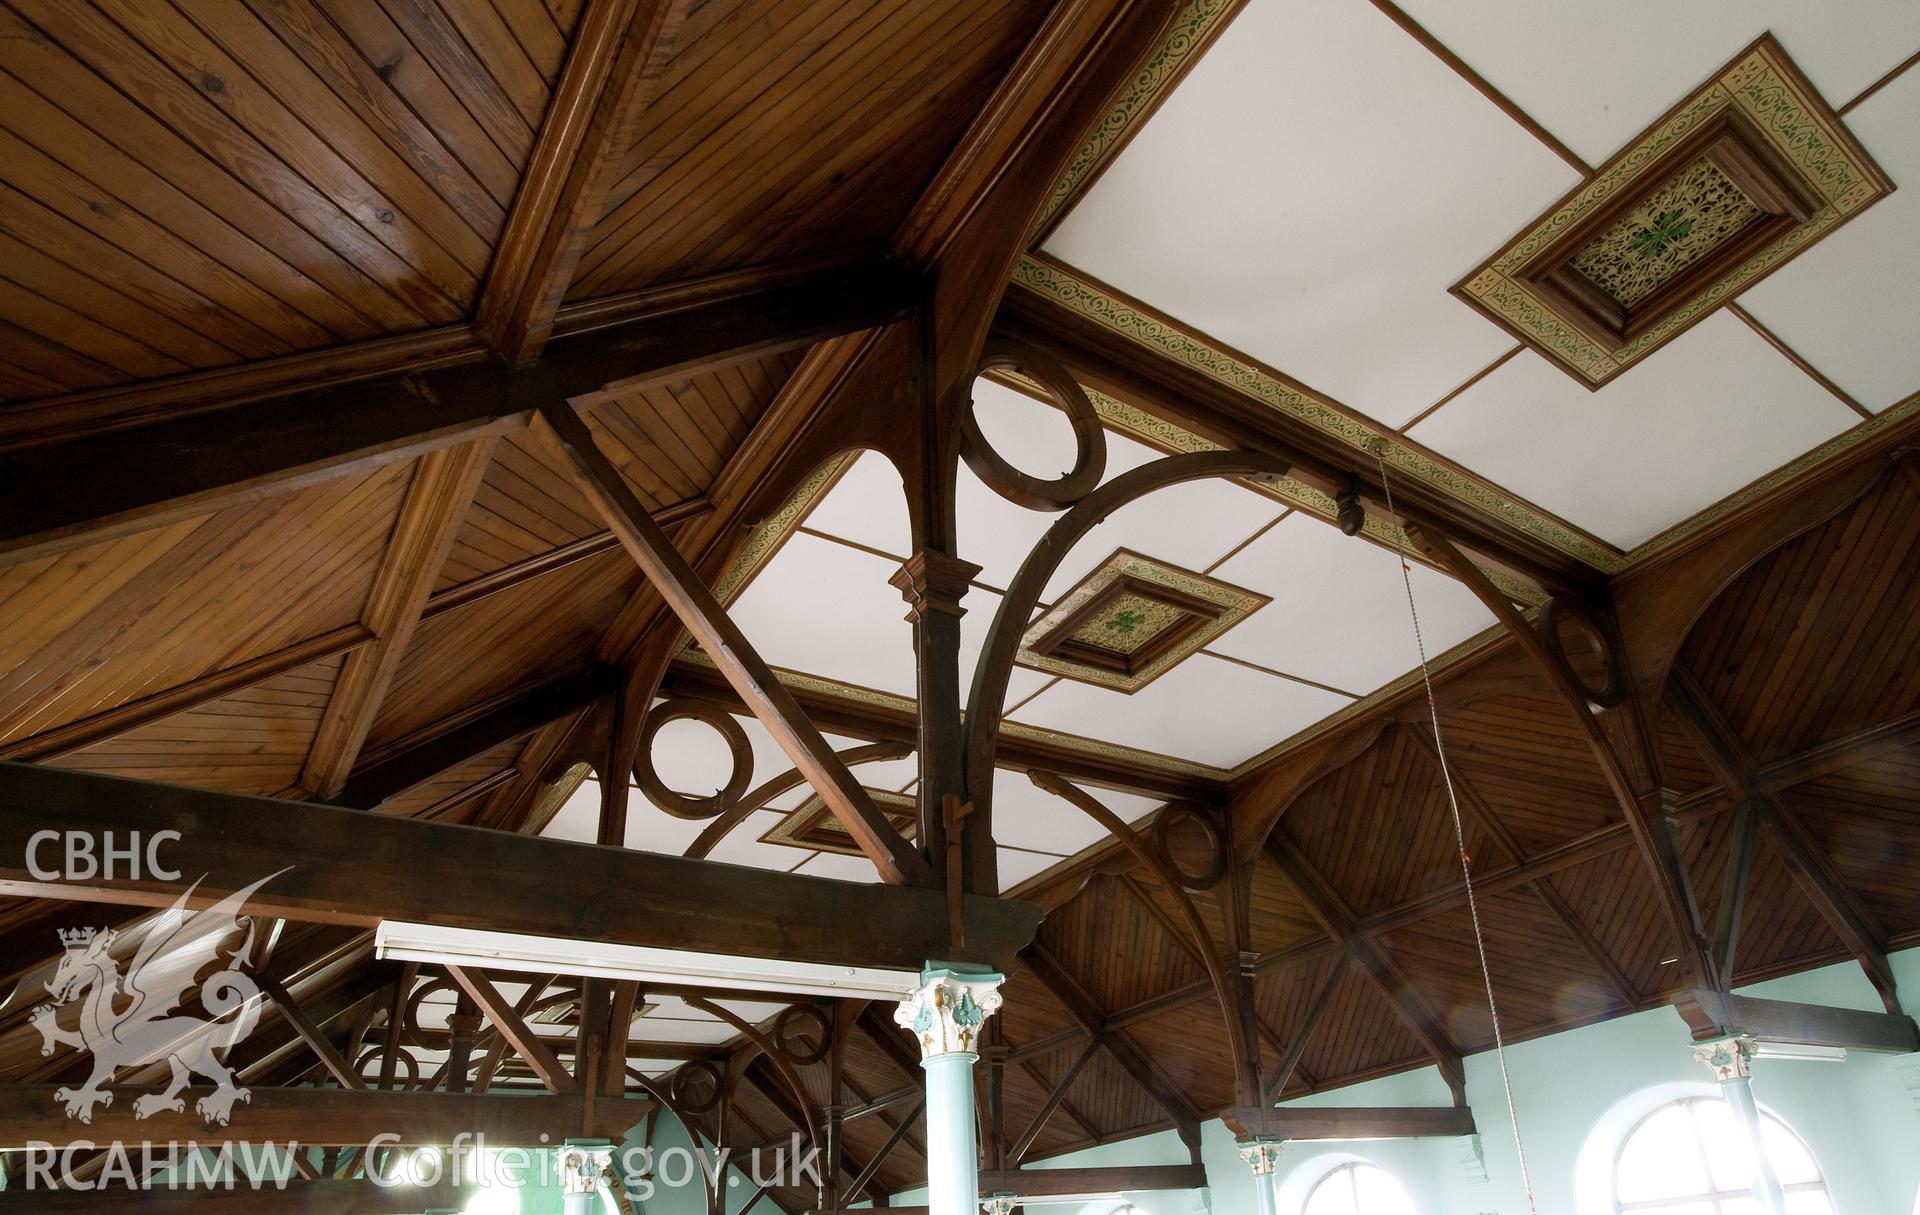 Hanbury Road baptist chapel, Bargoed, digital colour photograph showing roof detail showing the ornate trusses; lozenge pattern ceiling boarded; painted and stencilled ventilators, received in the course of Emergency Recording case ref no RCS2/1/2247.